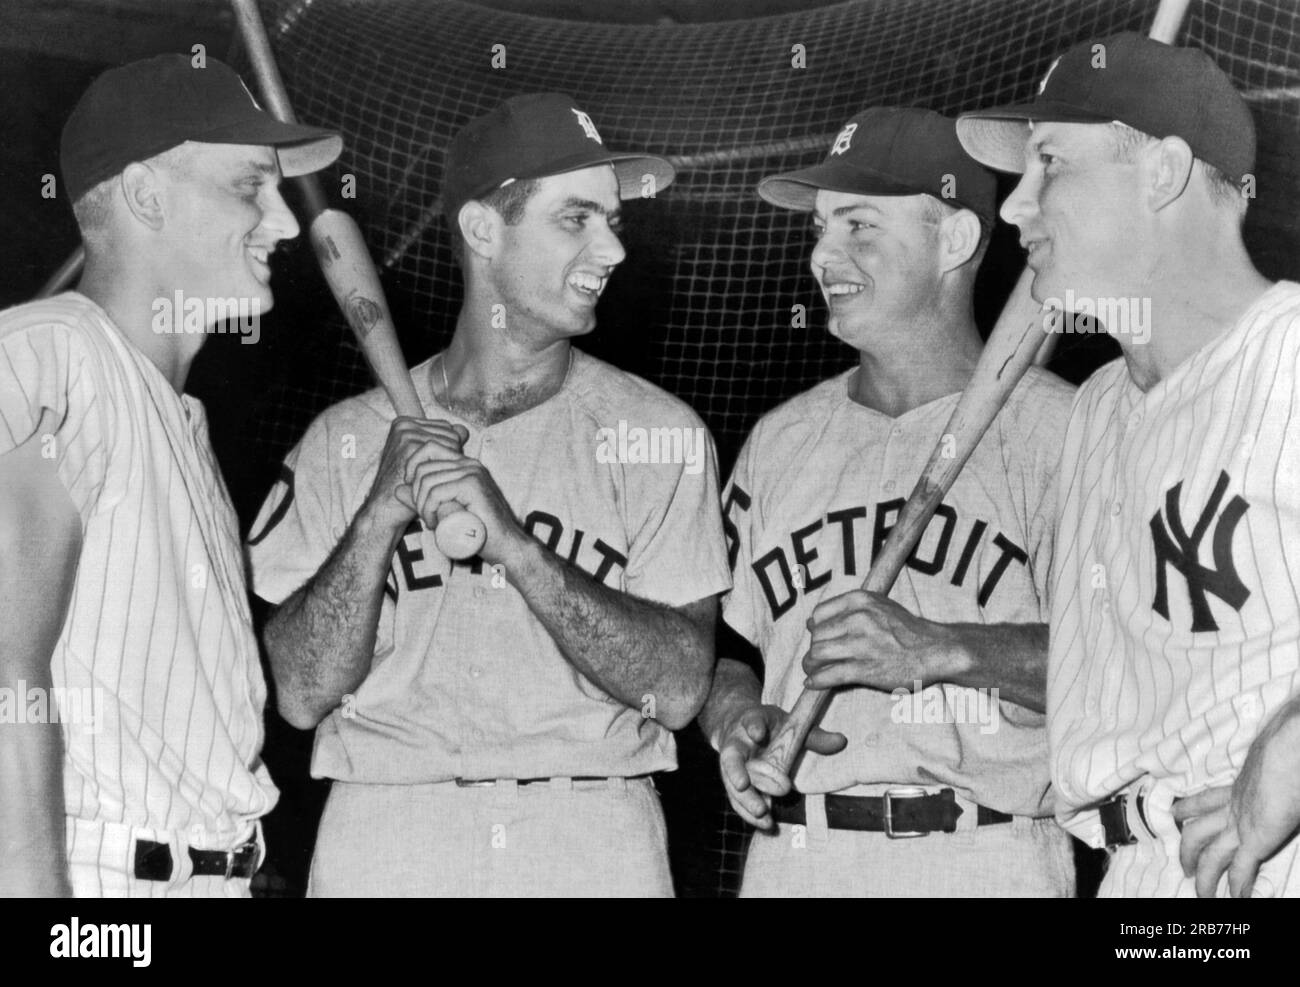 New York, New York:  September 2, 1961 New York Yankee and Detroit Tiger sluggers before game to battle for first place in the American League. L-R: Roger Maris, 51 home runs, 121 RBI; Rocky Colavito, 39 and 122; Norm Cash, 32 and 111; and Mickey Mantle, 48 and 114. Stock Photo